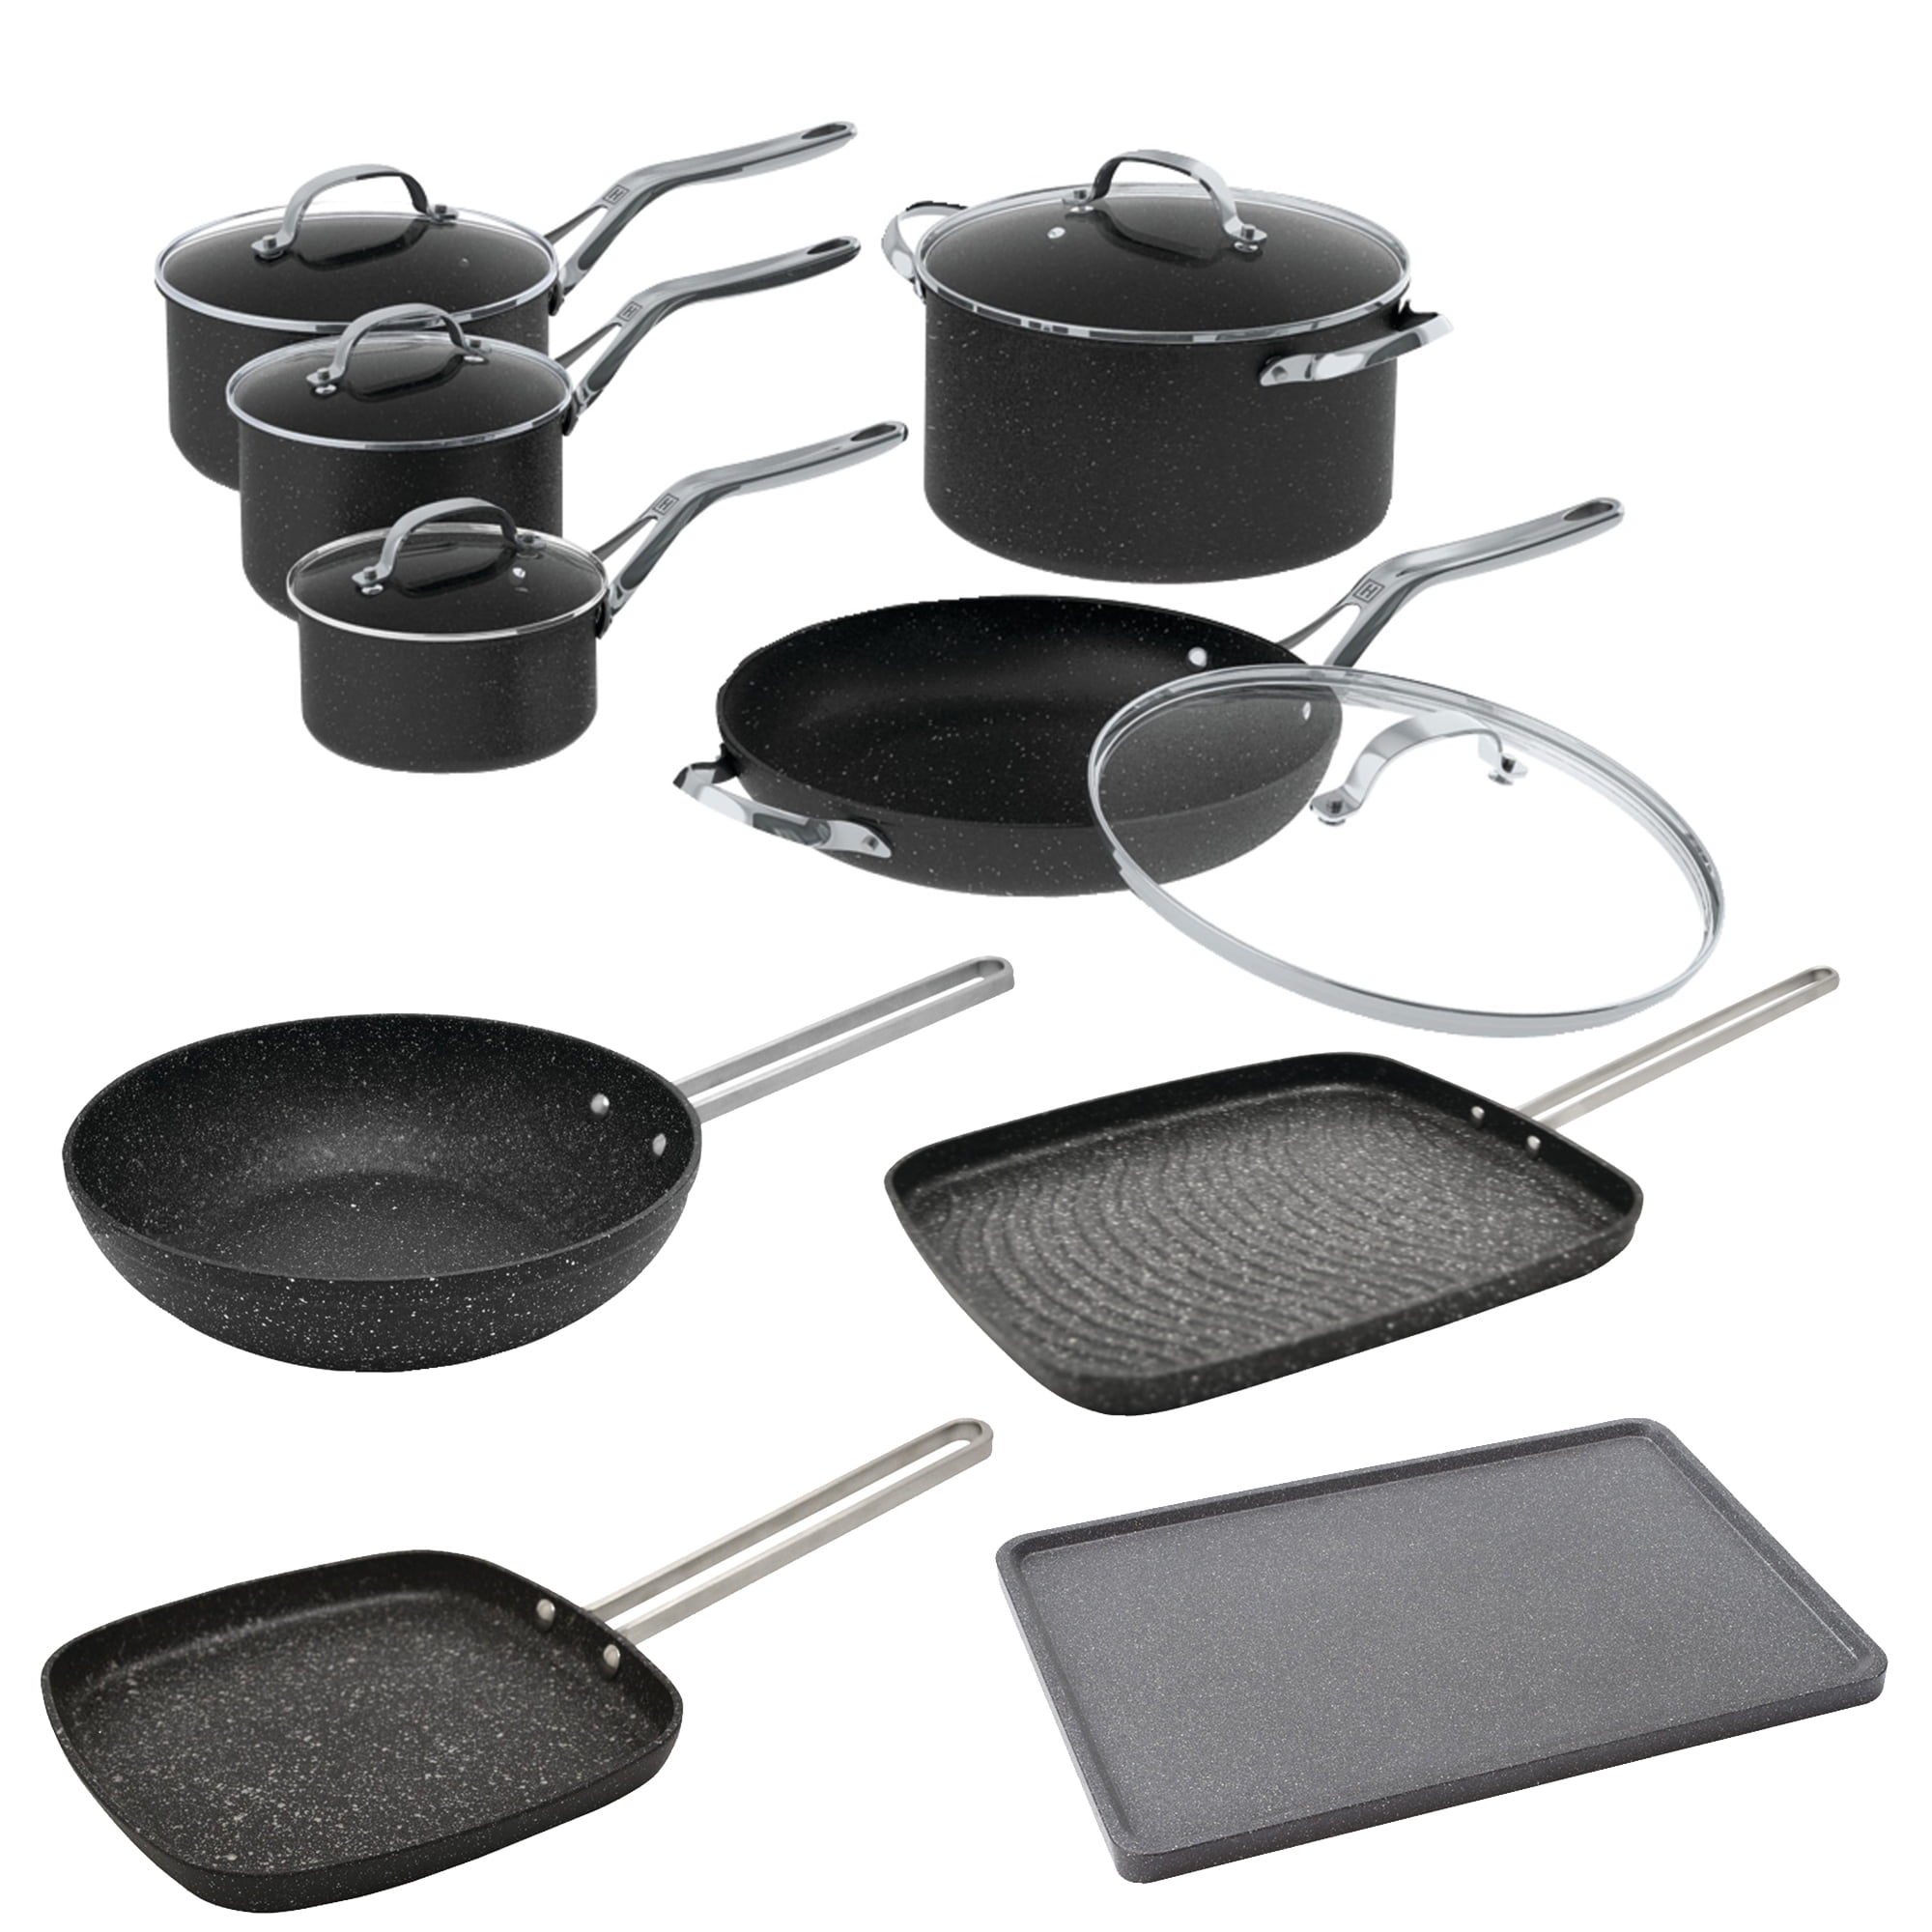 Starfrit The Rock Personal Griddle Pan - 6.5 in., 1 UNIT - Fry's